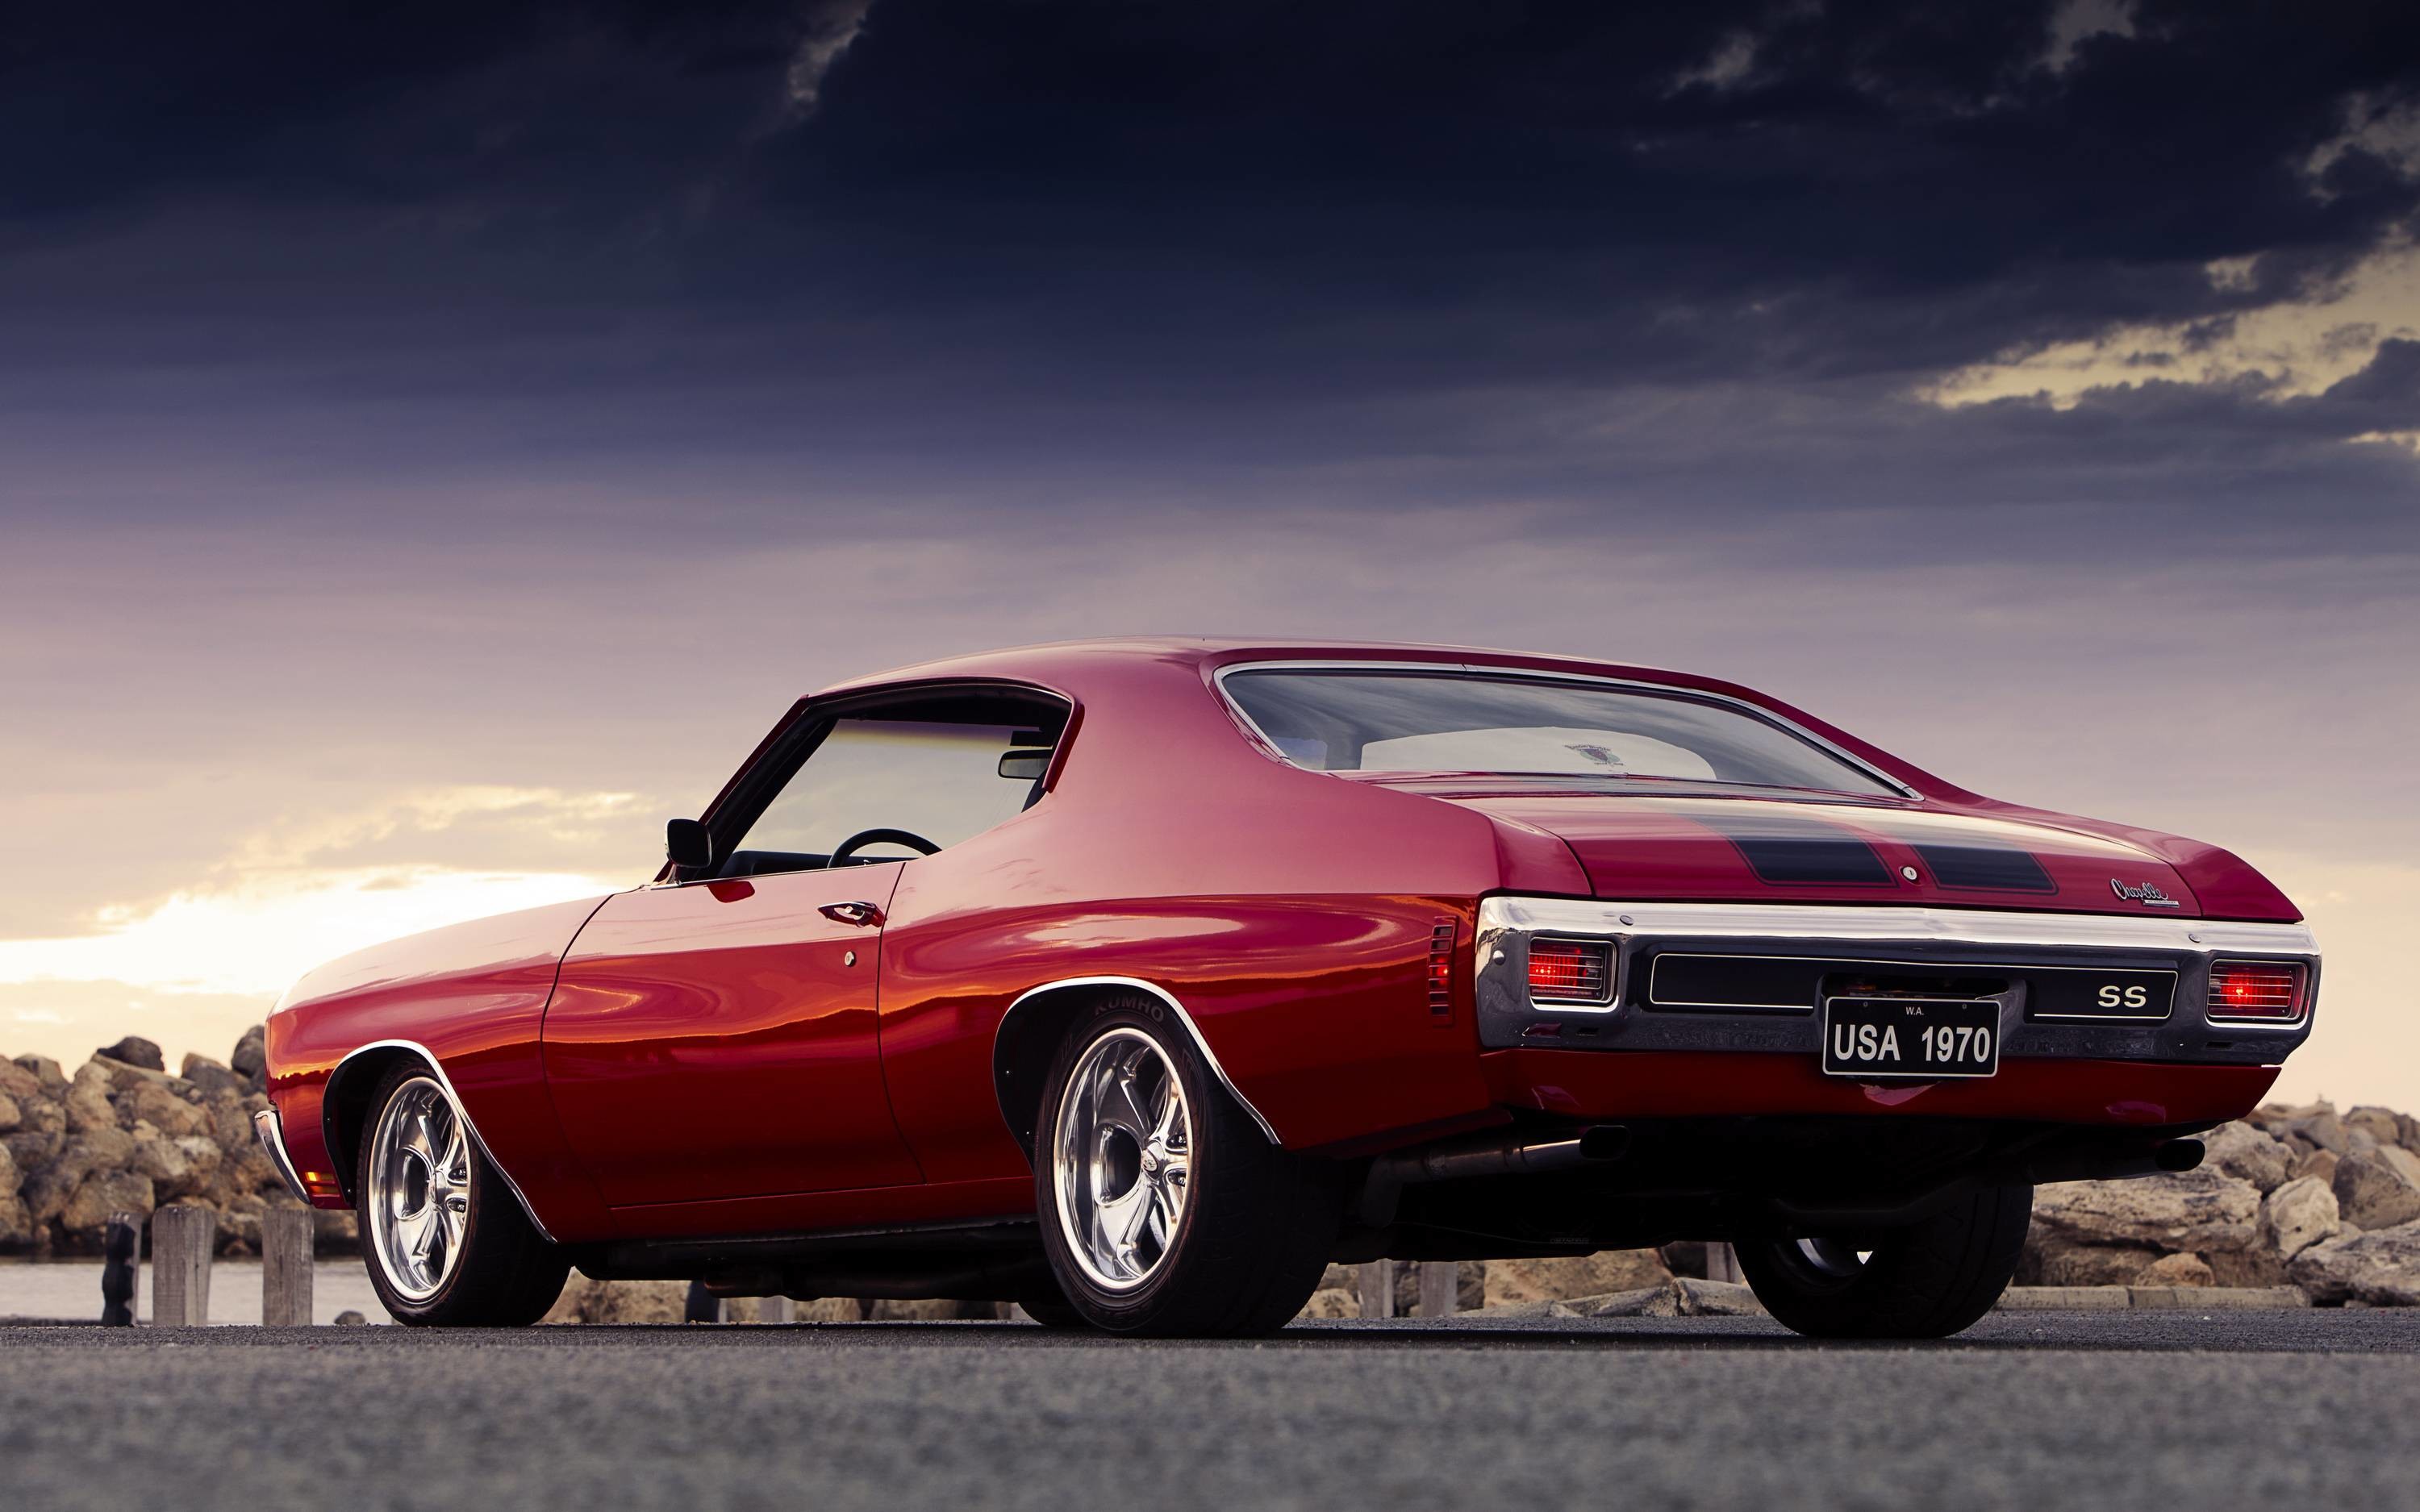 1970 Chevelle Ss 454 Wallpaper 75 images